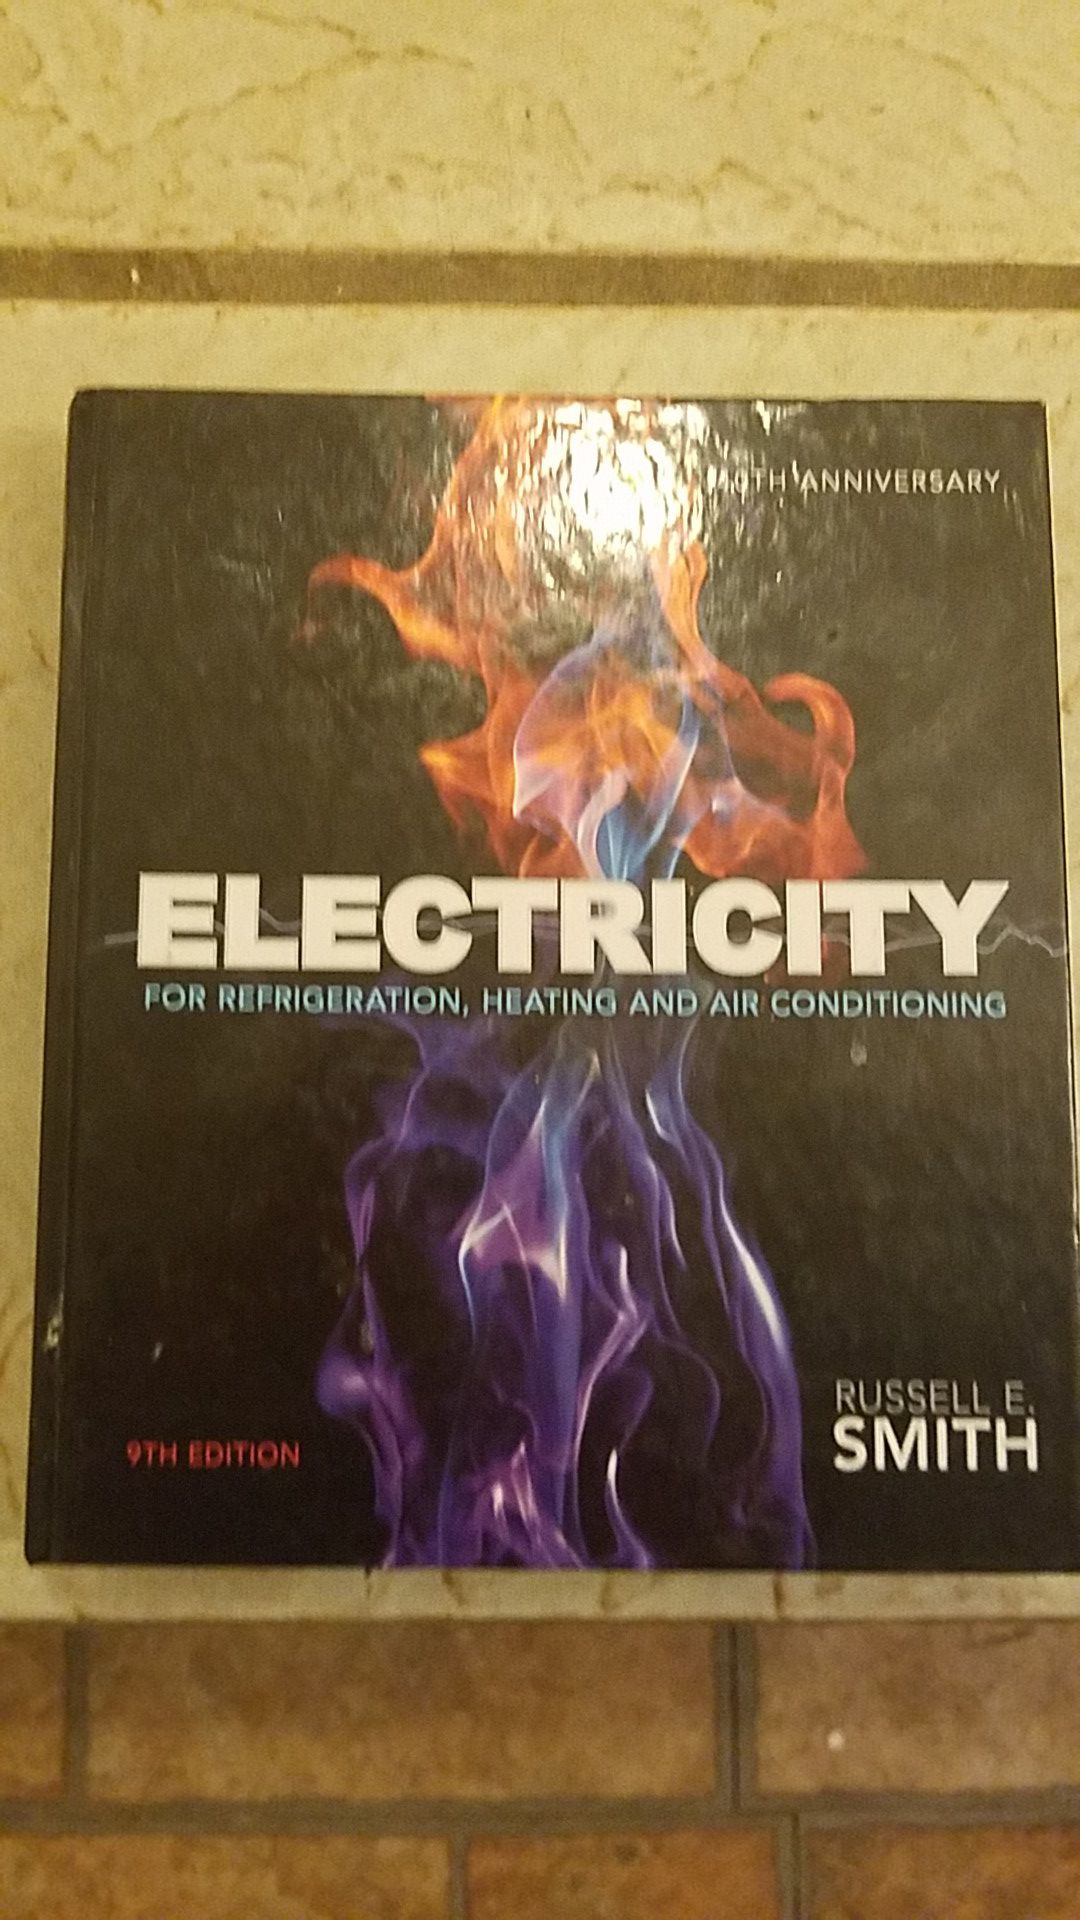 Electricity 9th Edition by Russell E. Smith